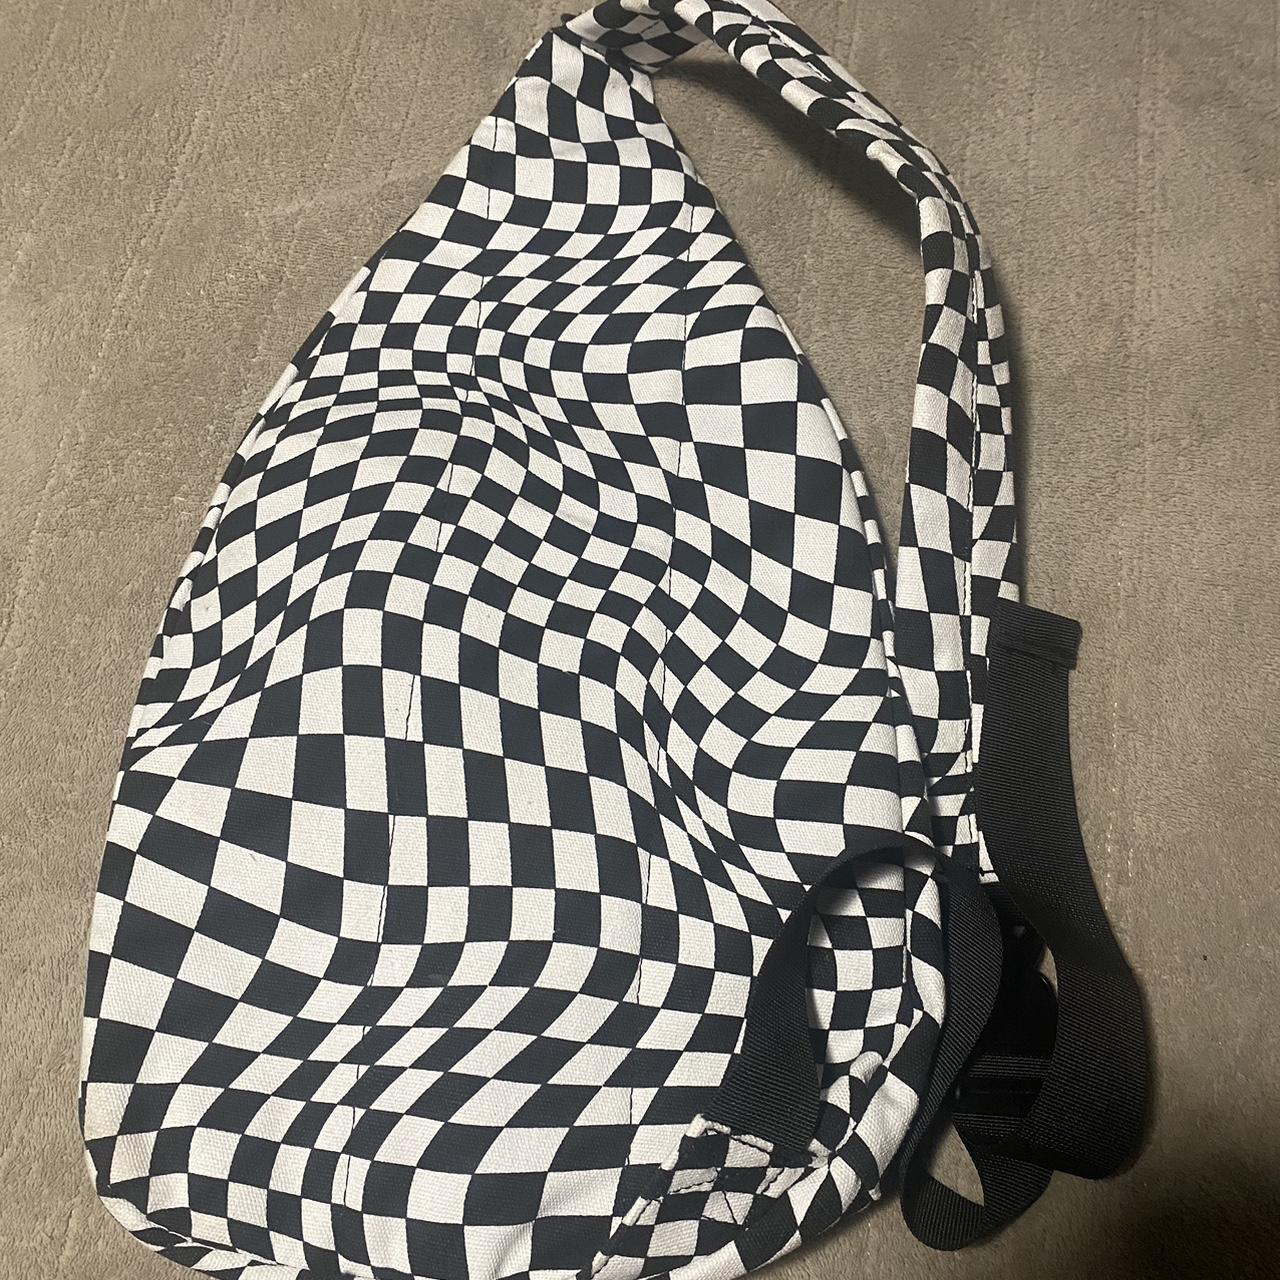 Zip up Black white checkered bag with beige lining - Depop